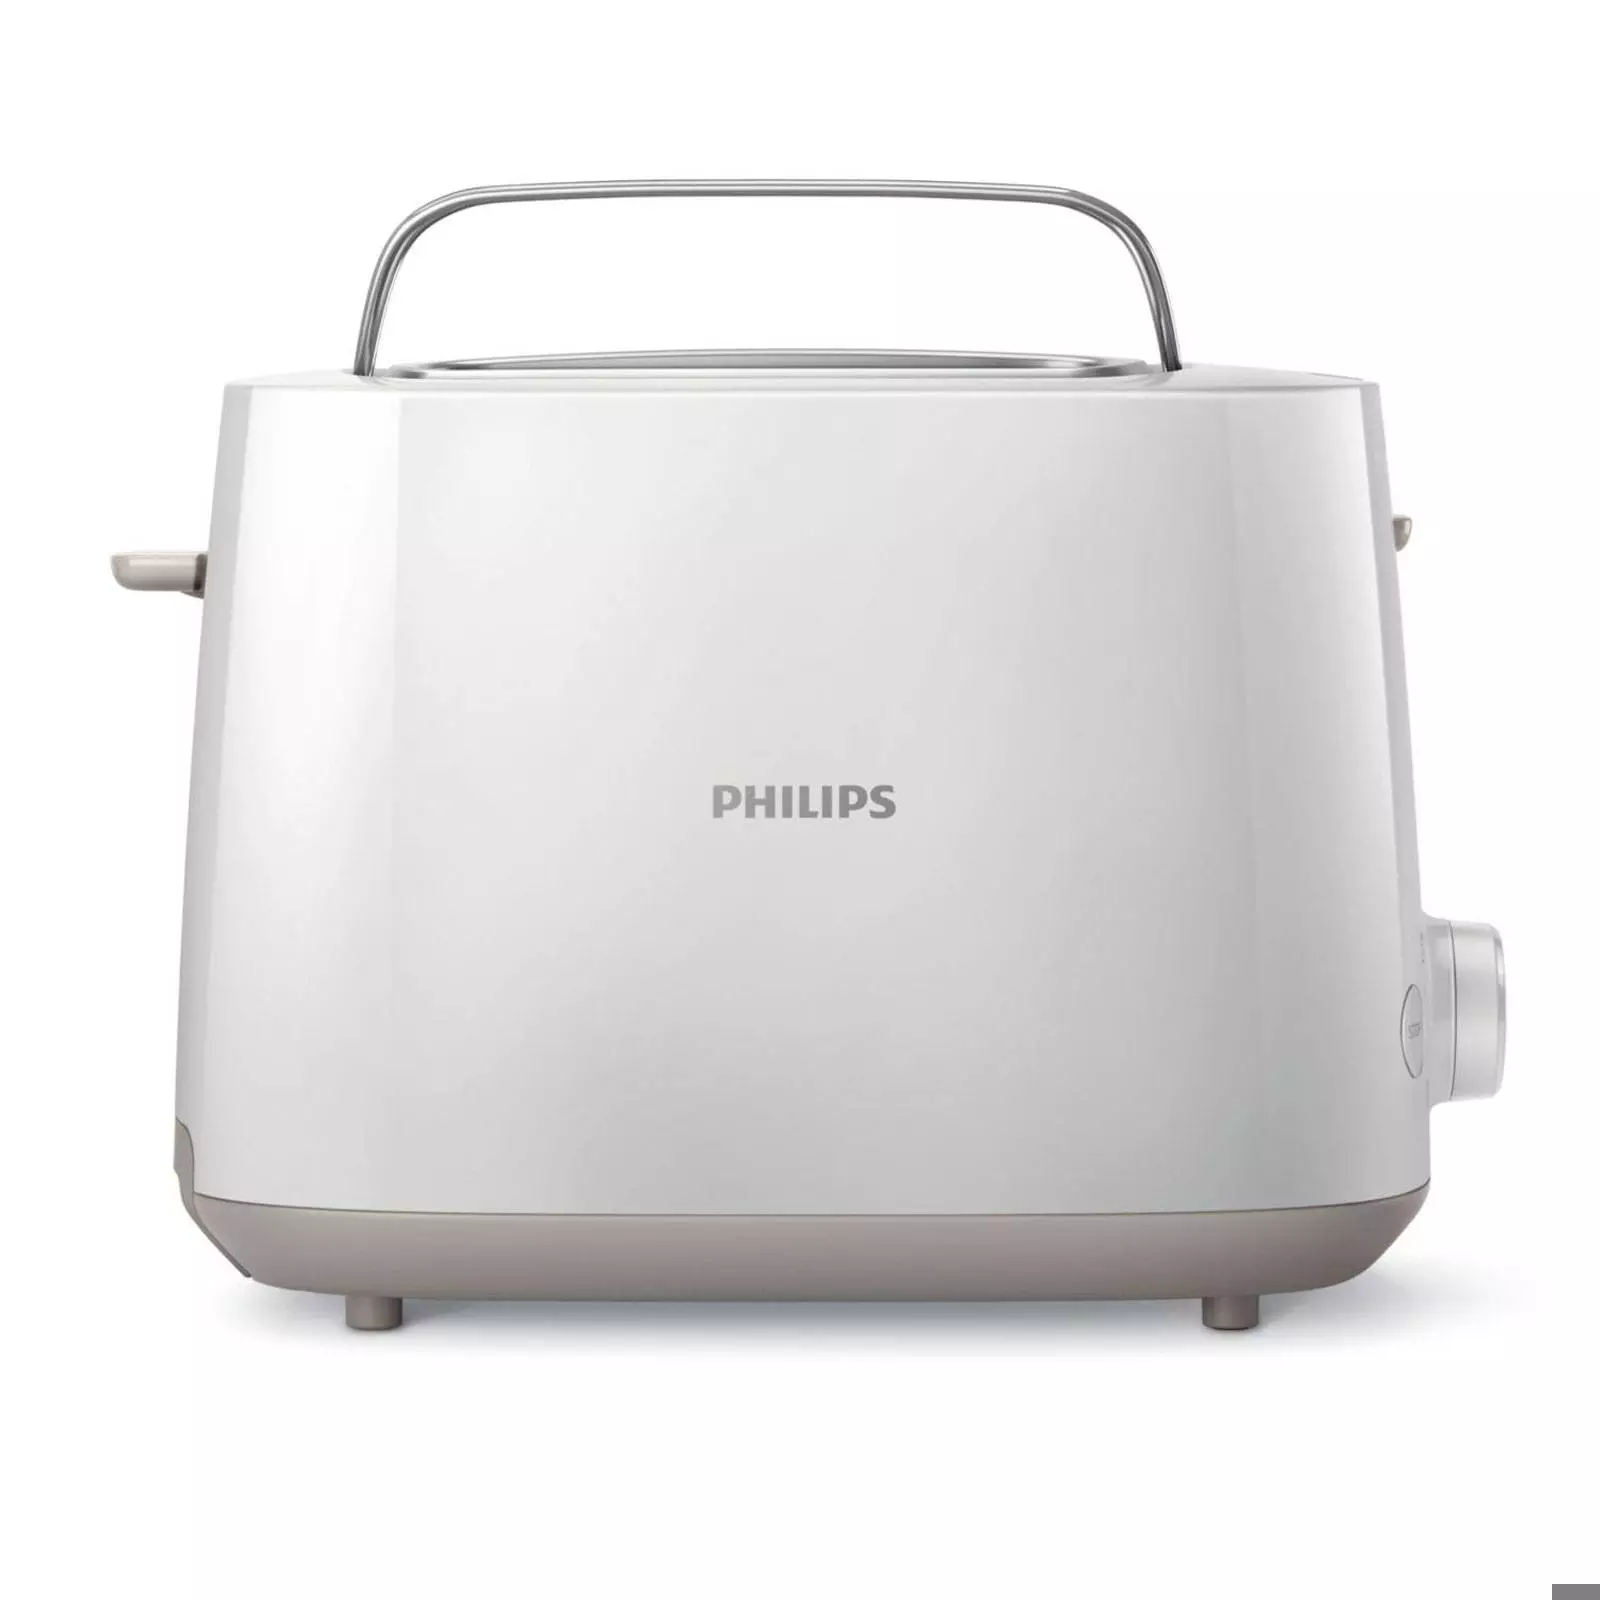 Philips Toaster With Home Baking Attachment